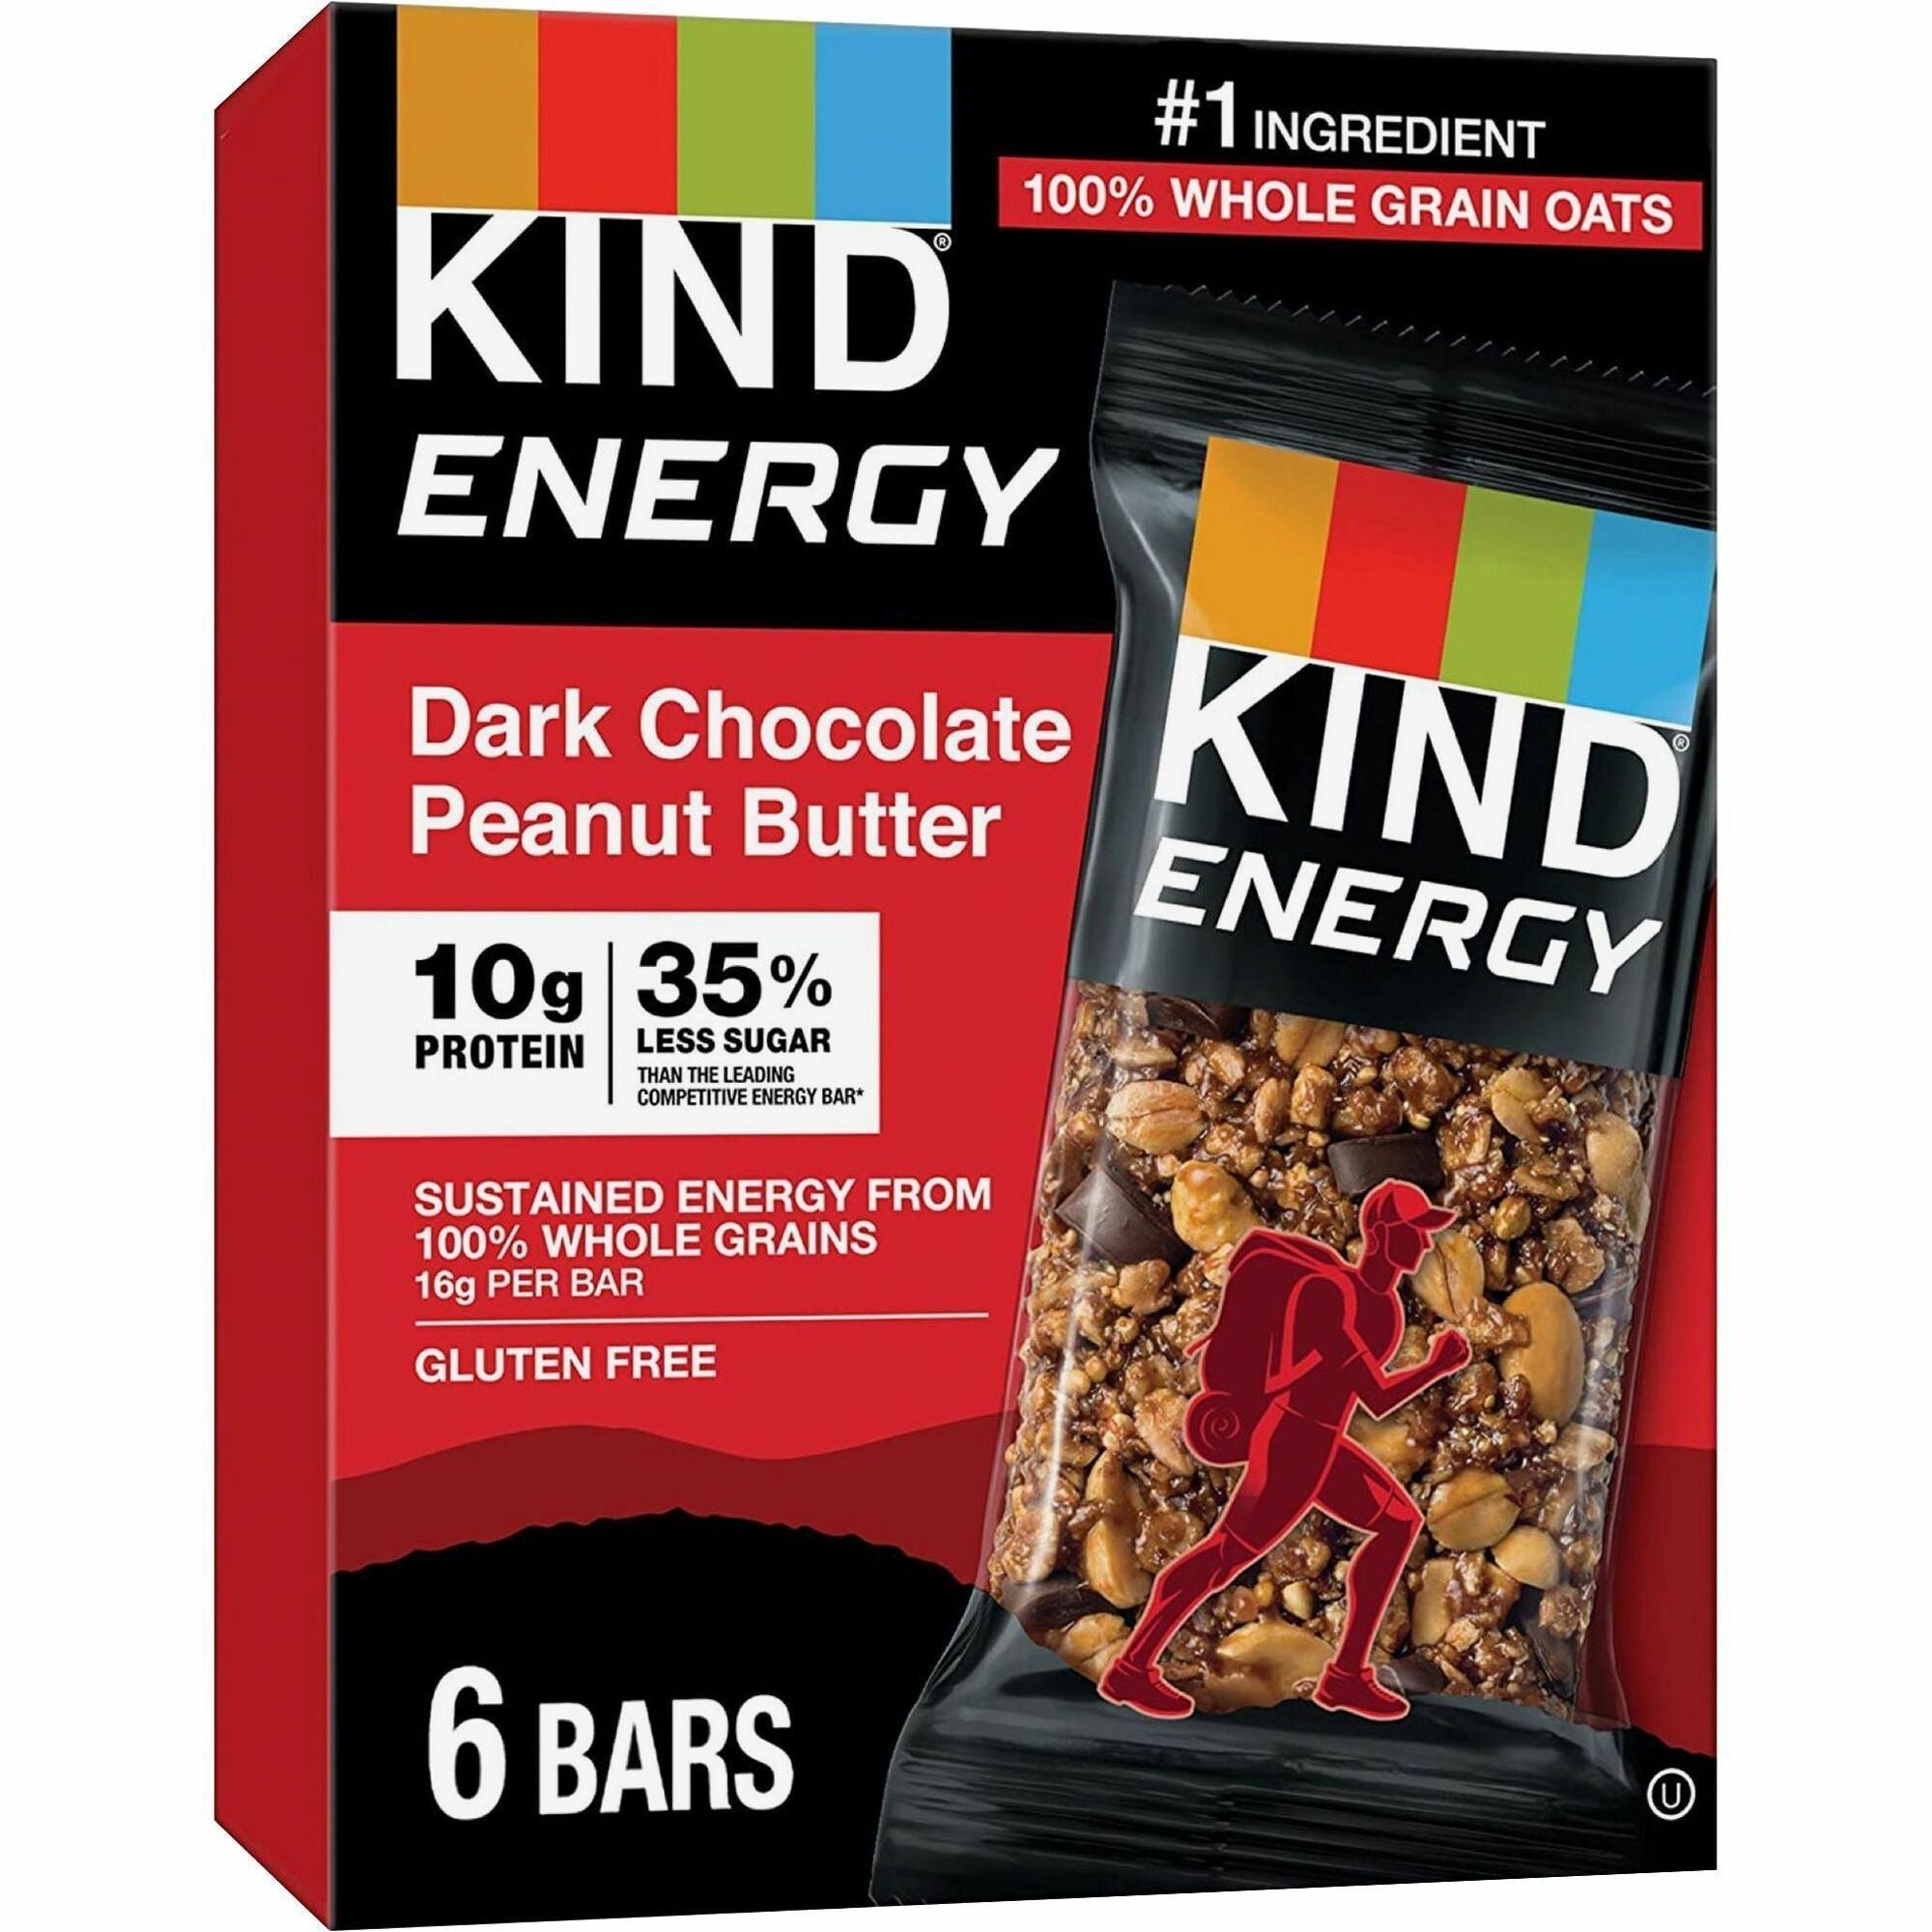 kind-energy-bars-trans-fat-free-gluten-free-individually-wrapped-dark-chocolate-peanut-butter-210-oz-6-box_knd28716 - 1